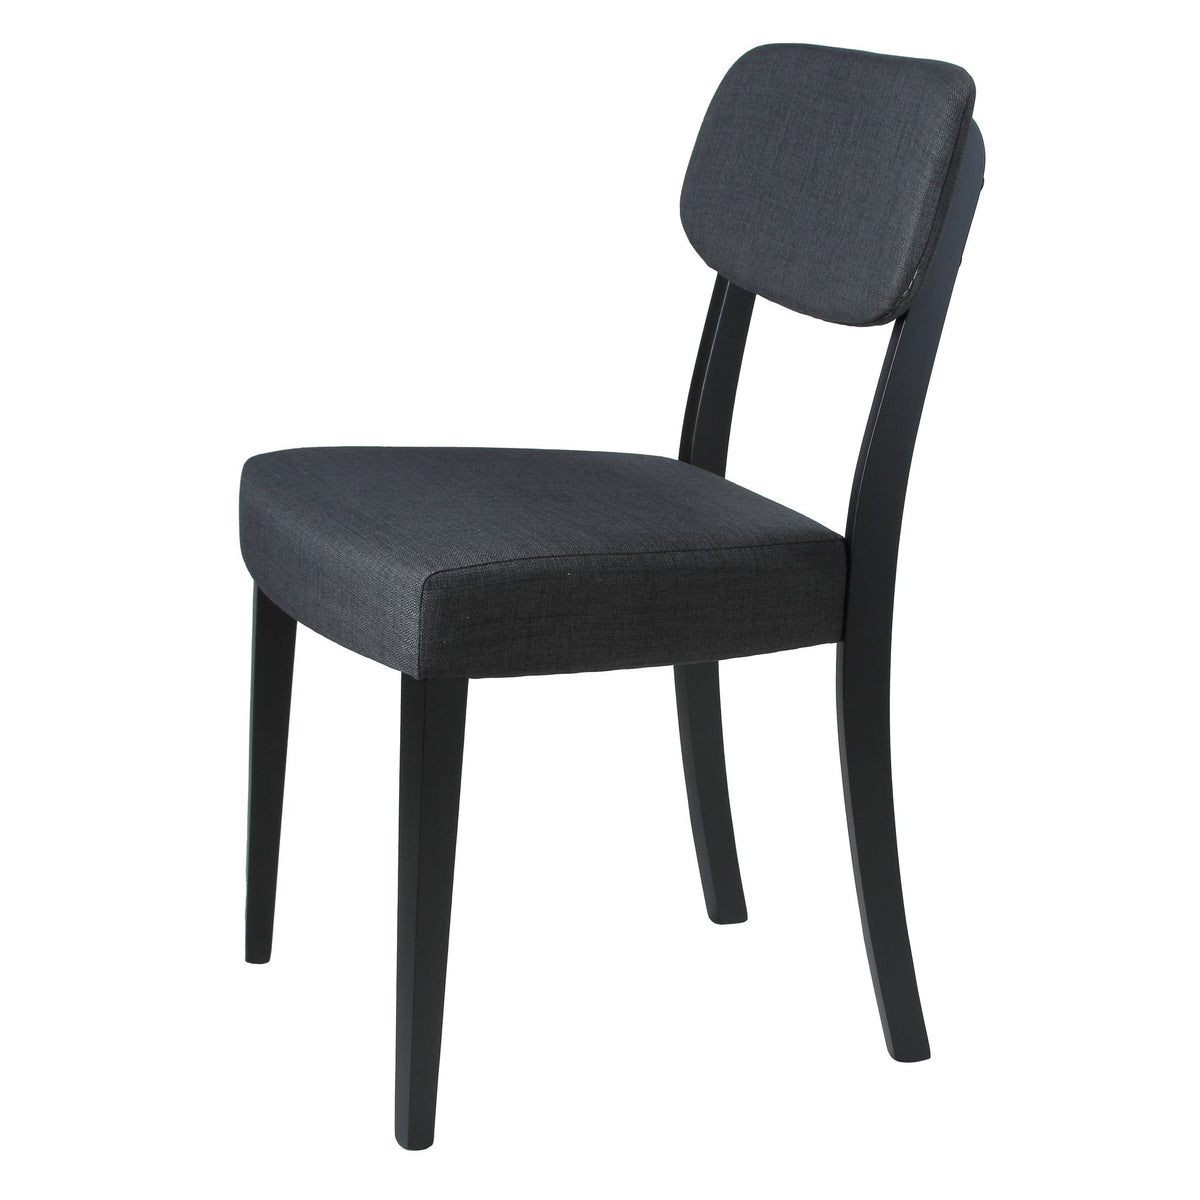 Cortesi Home Dao Dining Chair in Black Finish Wood with Charcoal Grey Fabric (Set of 2)